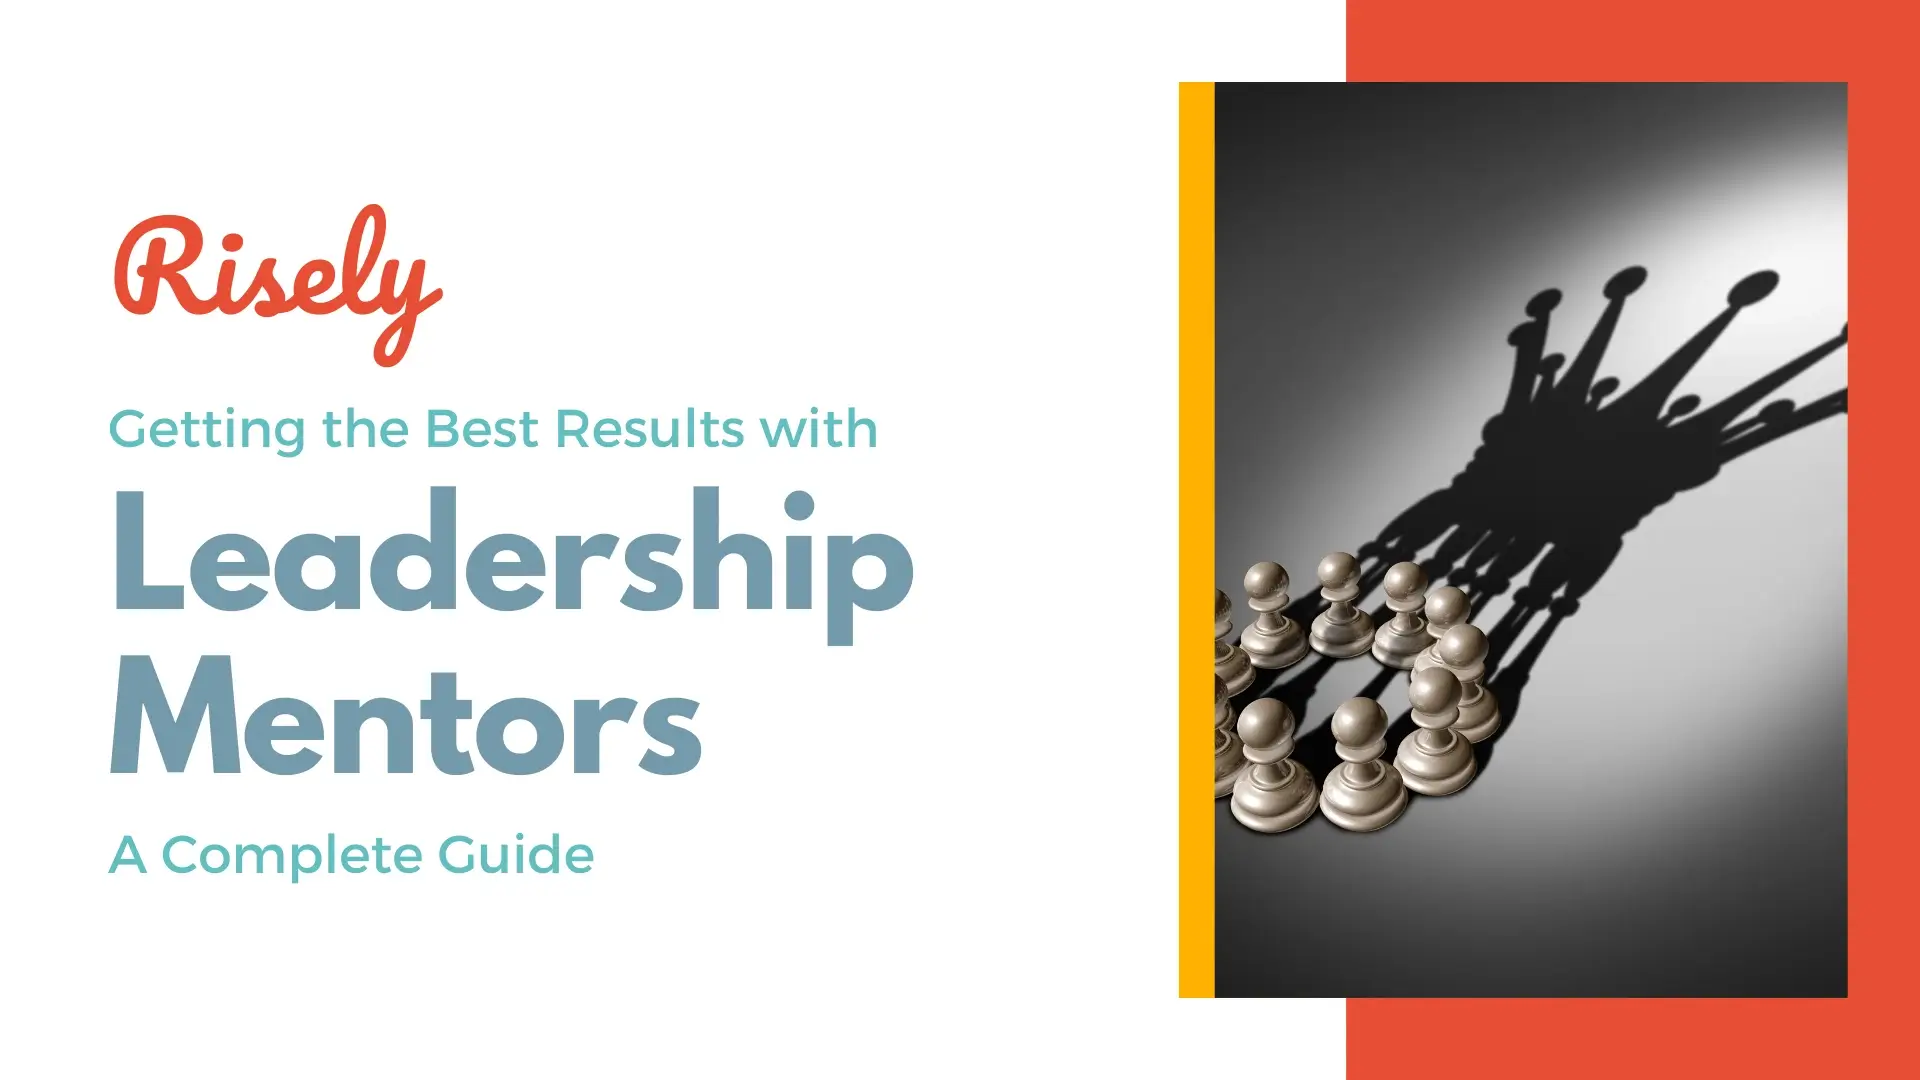 Getting the Best Results with Leadership Mentors: A Complete Guide